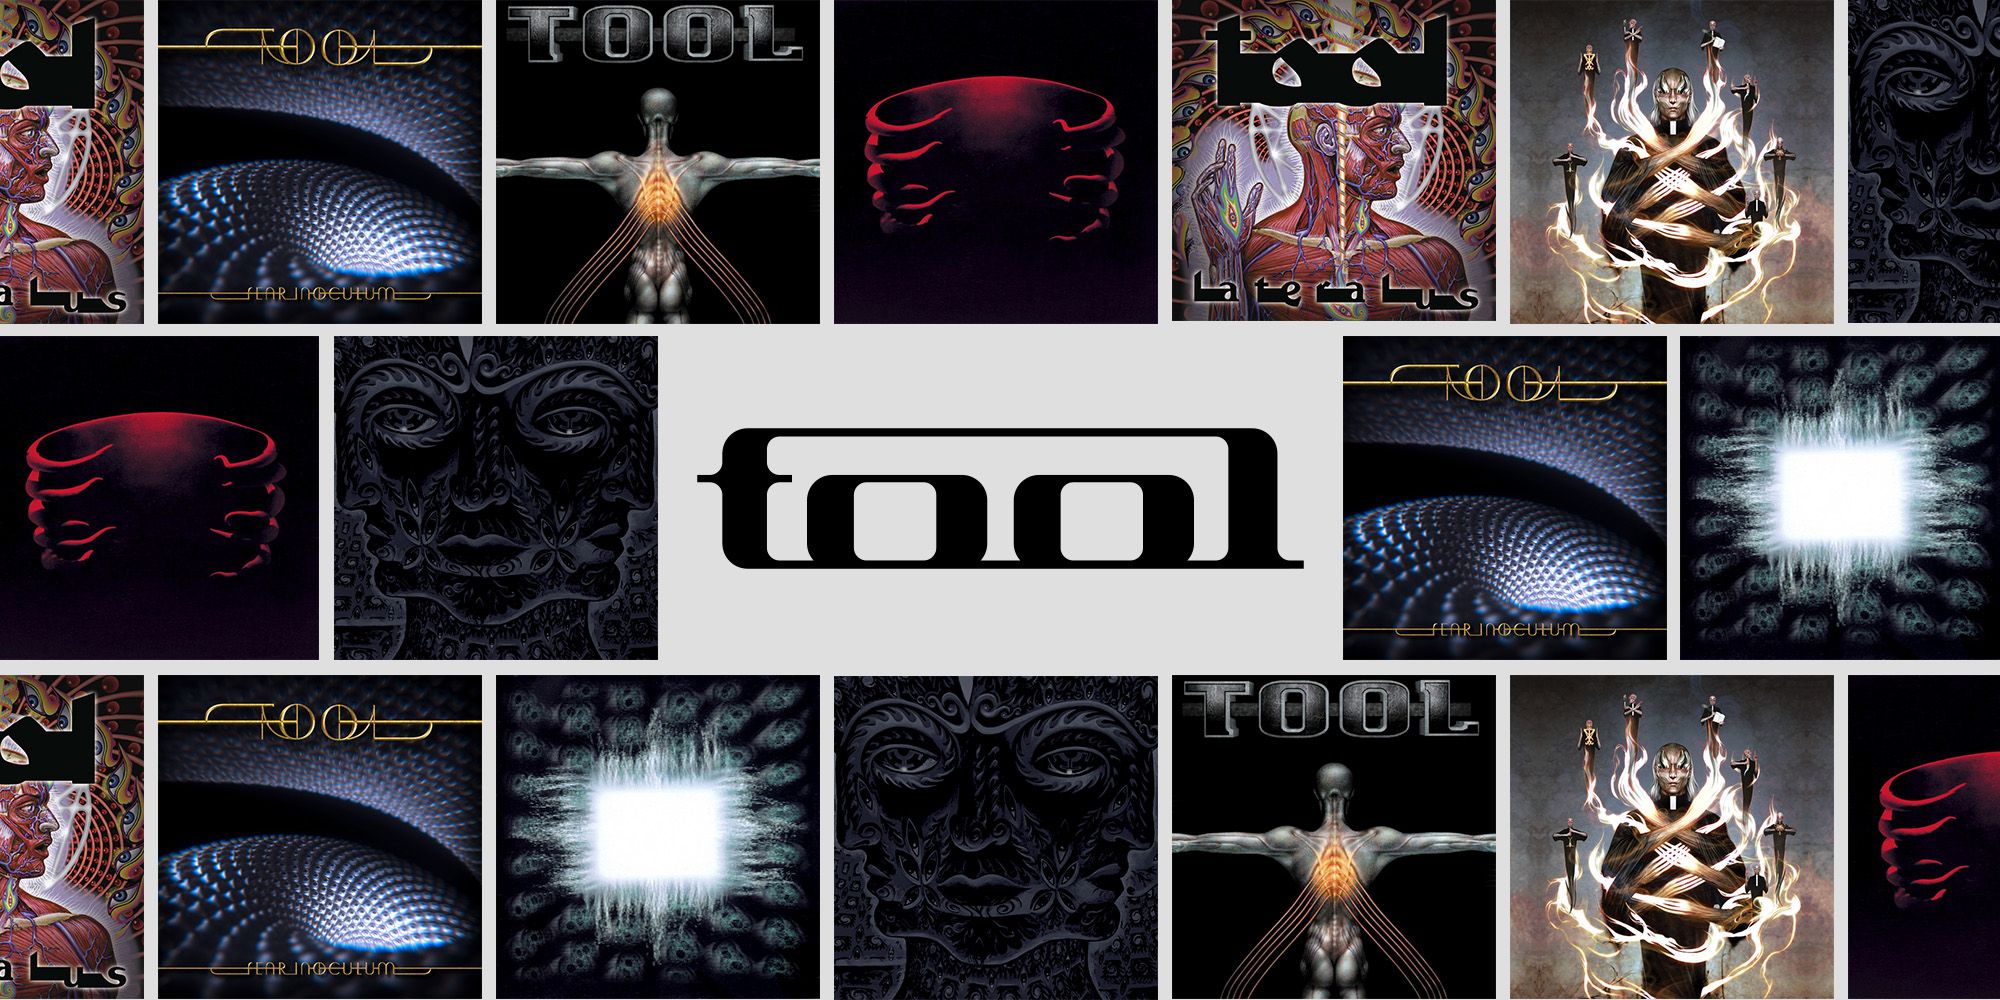 Best Tool Albums Ranked - All 7 Tool Albums Ranked From Worst to Best